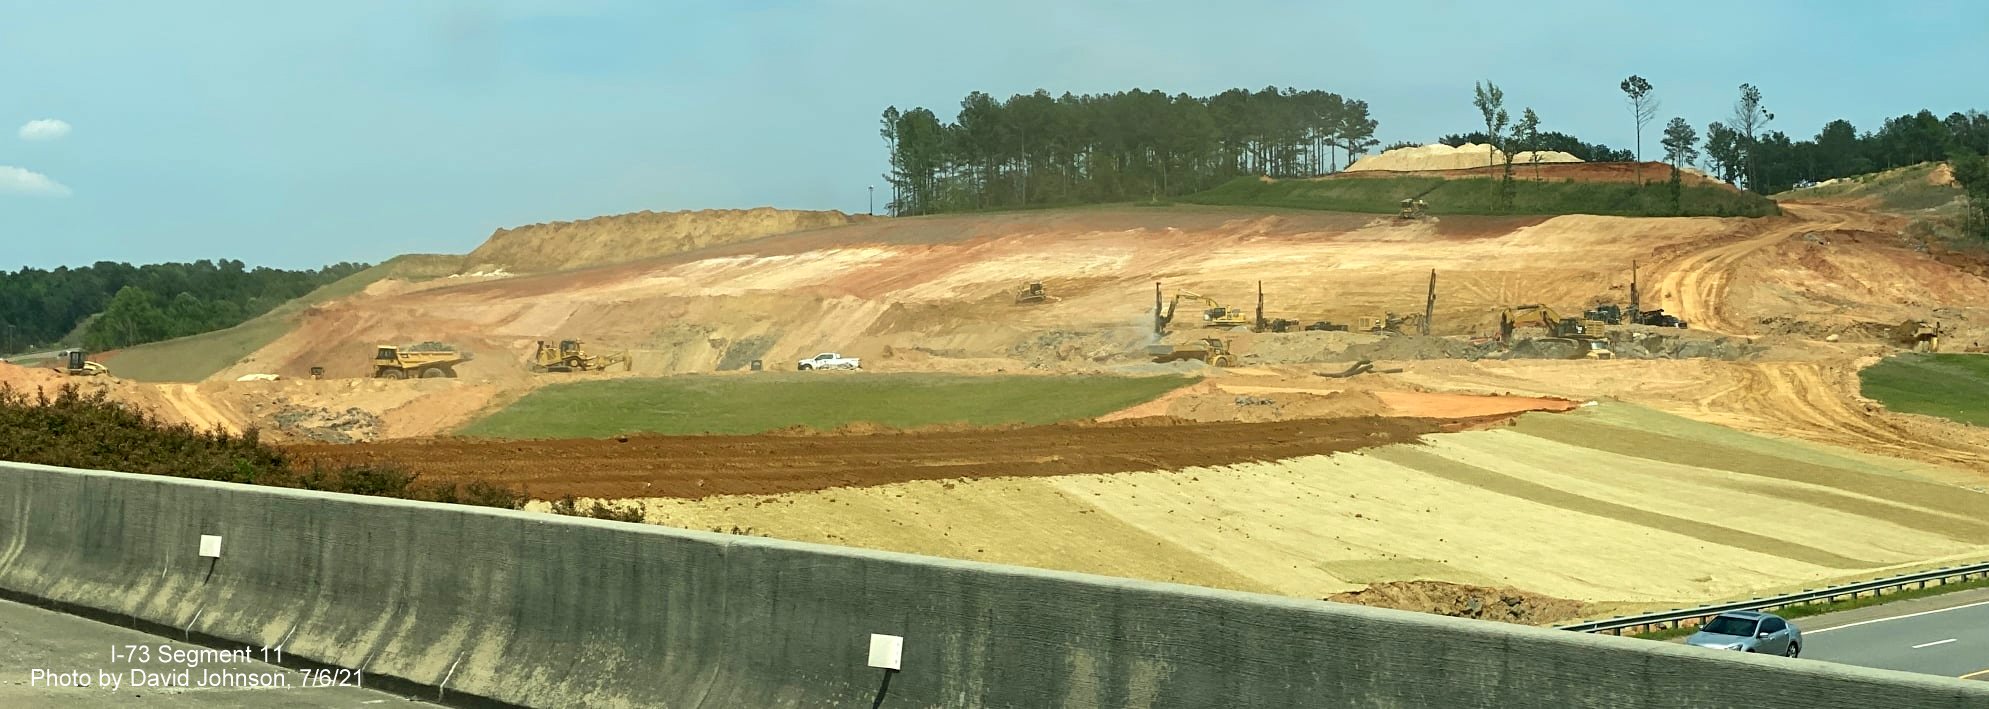 Image of I-73/I-74 Rockingham Bypass interchange under construction zone as seen from US 74 Business East, by David Johnson, July 2021